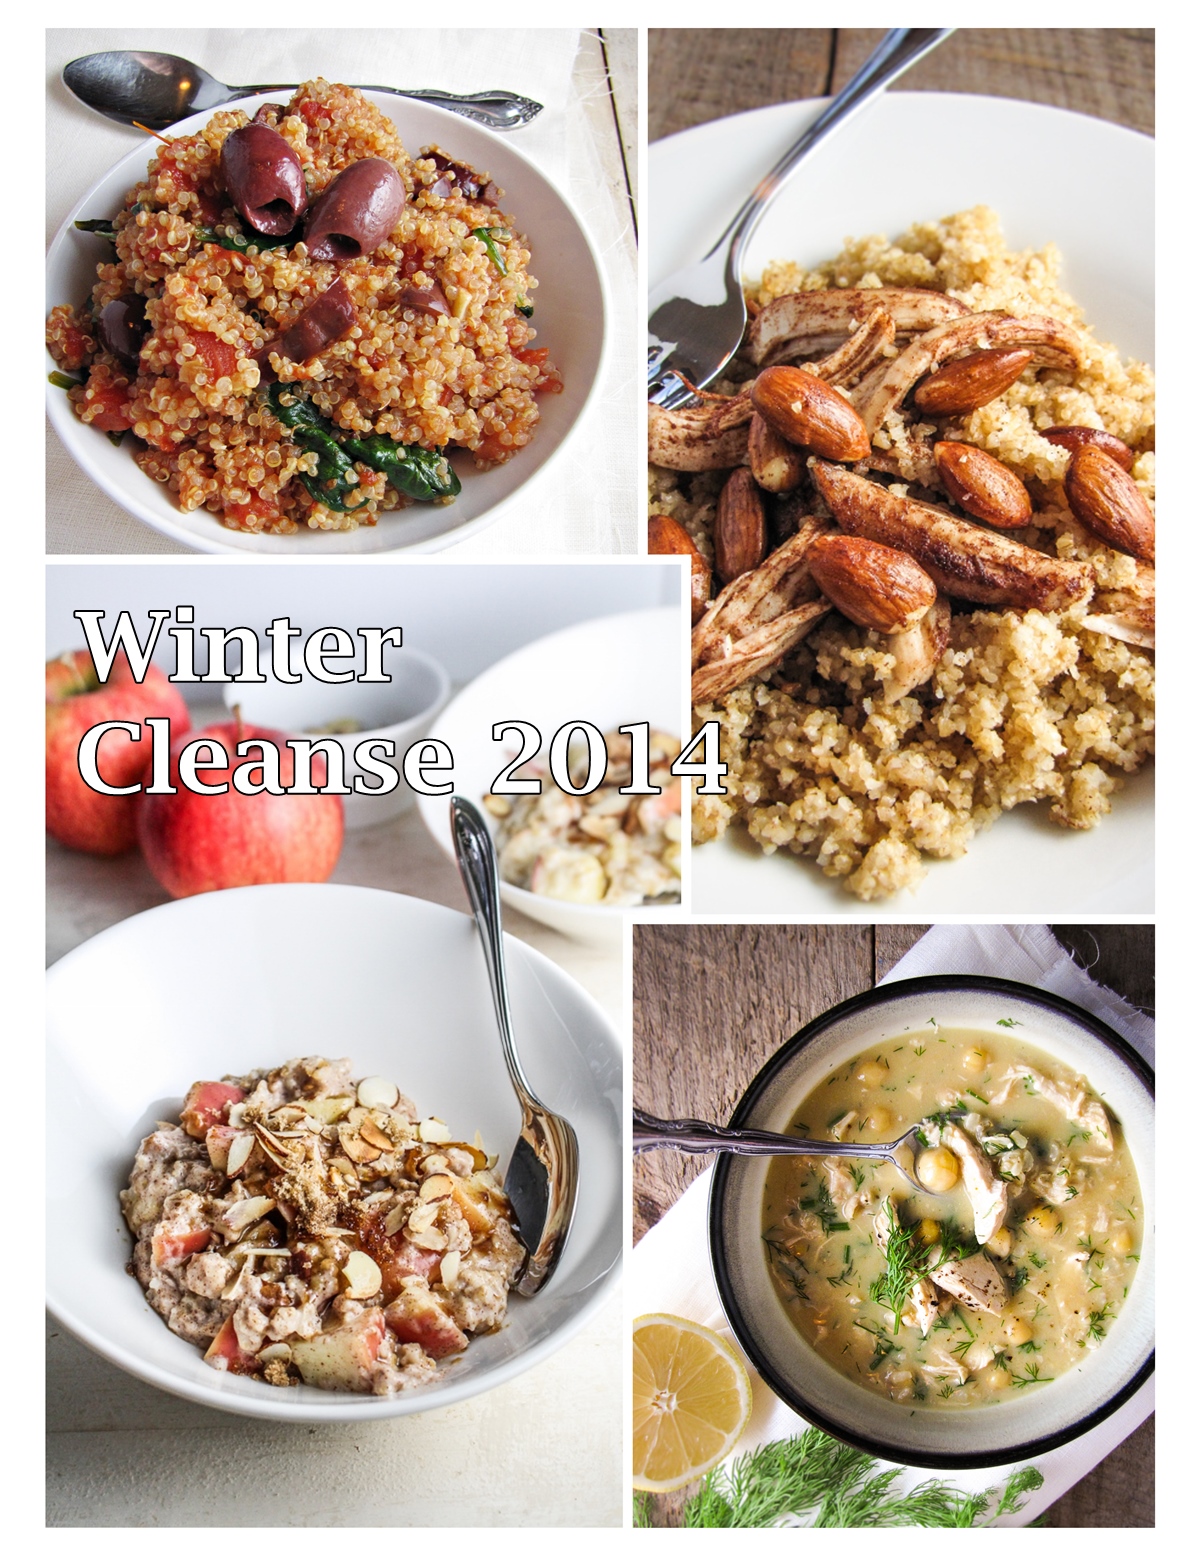 Winter Cleanse Recipes 2014